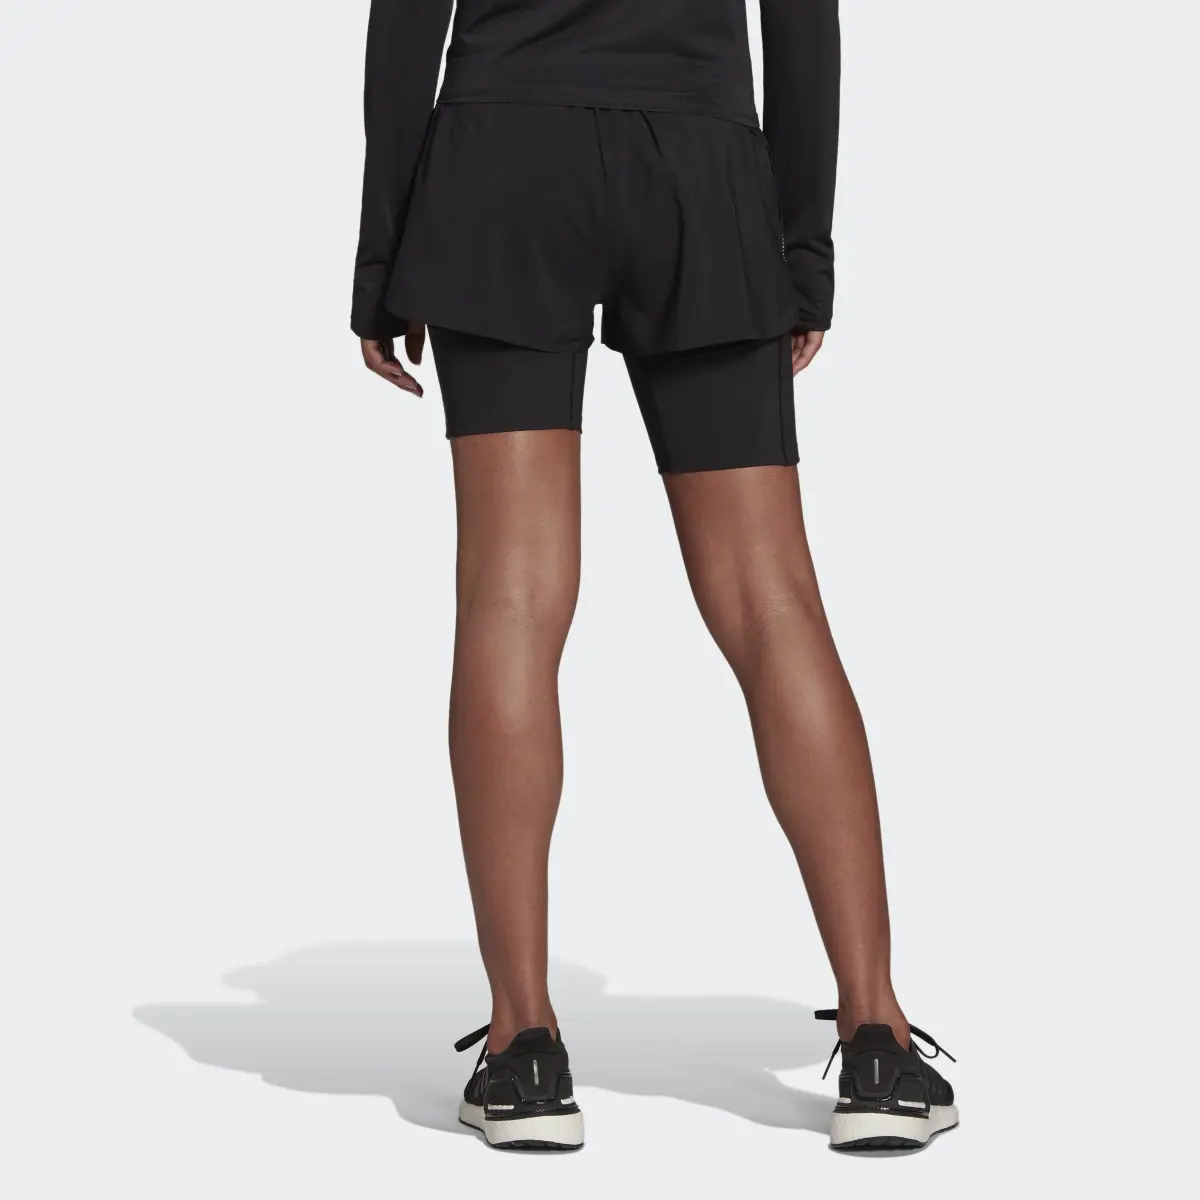 Adidas Run Icons Two-in-One Running Shorts. 2